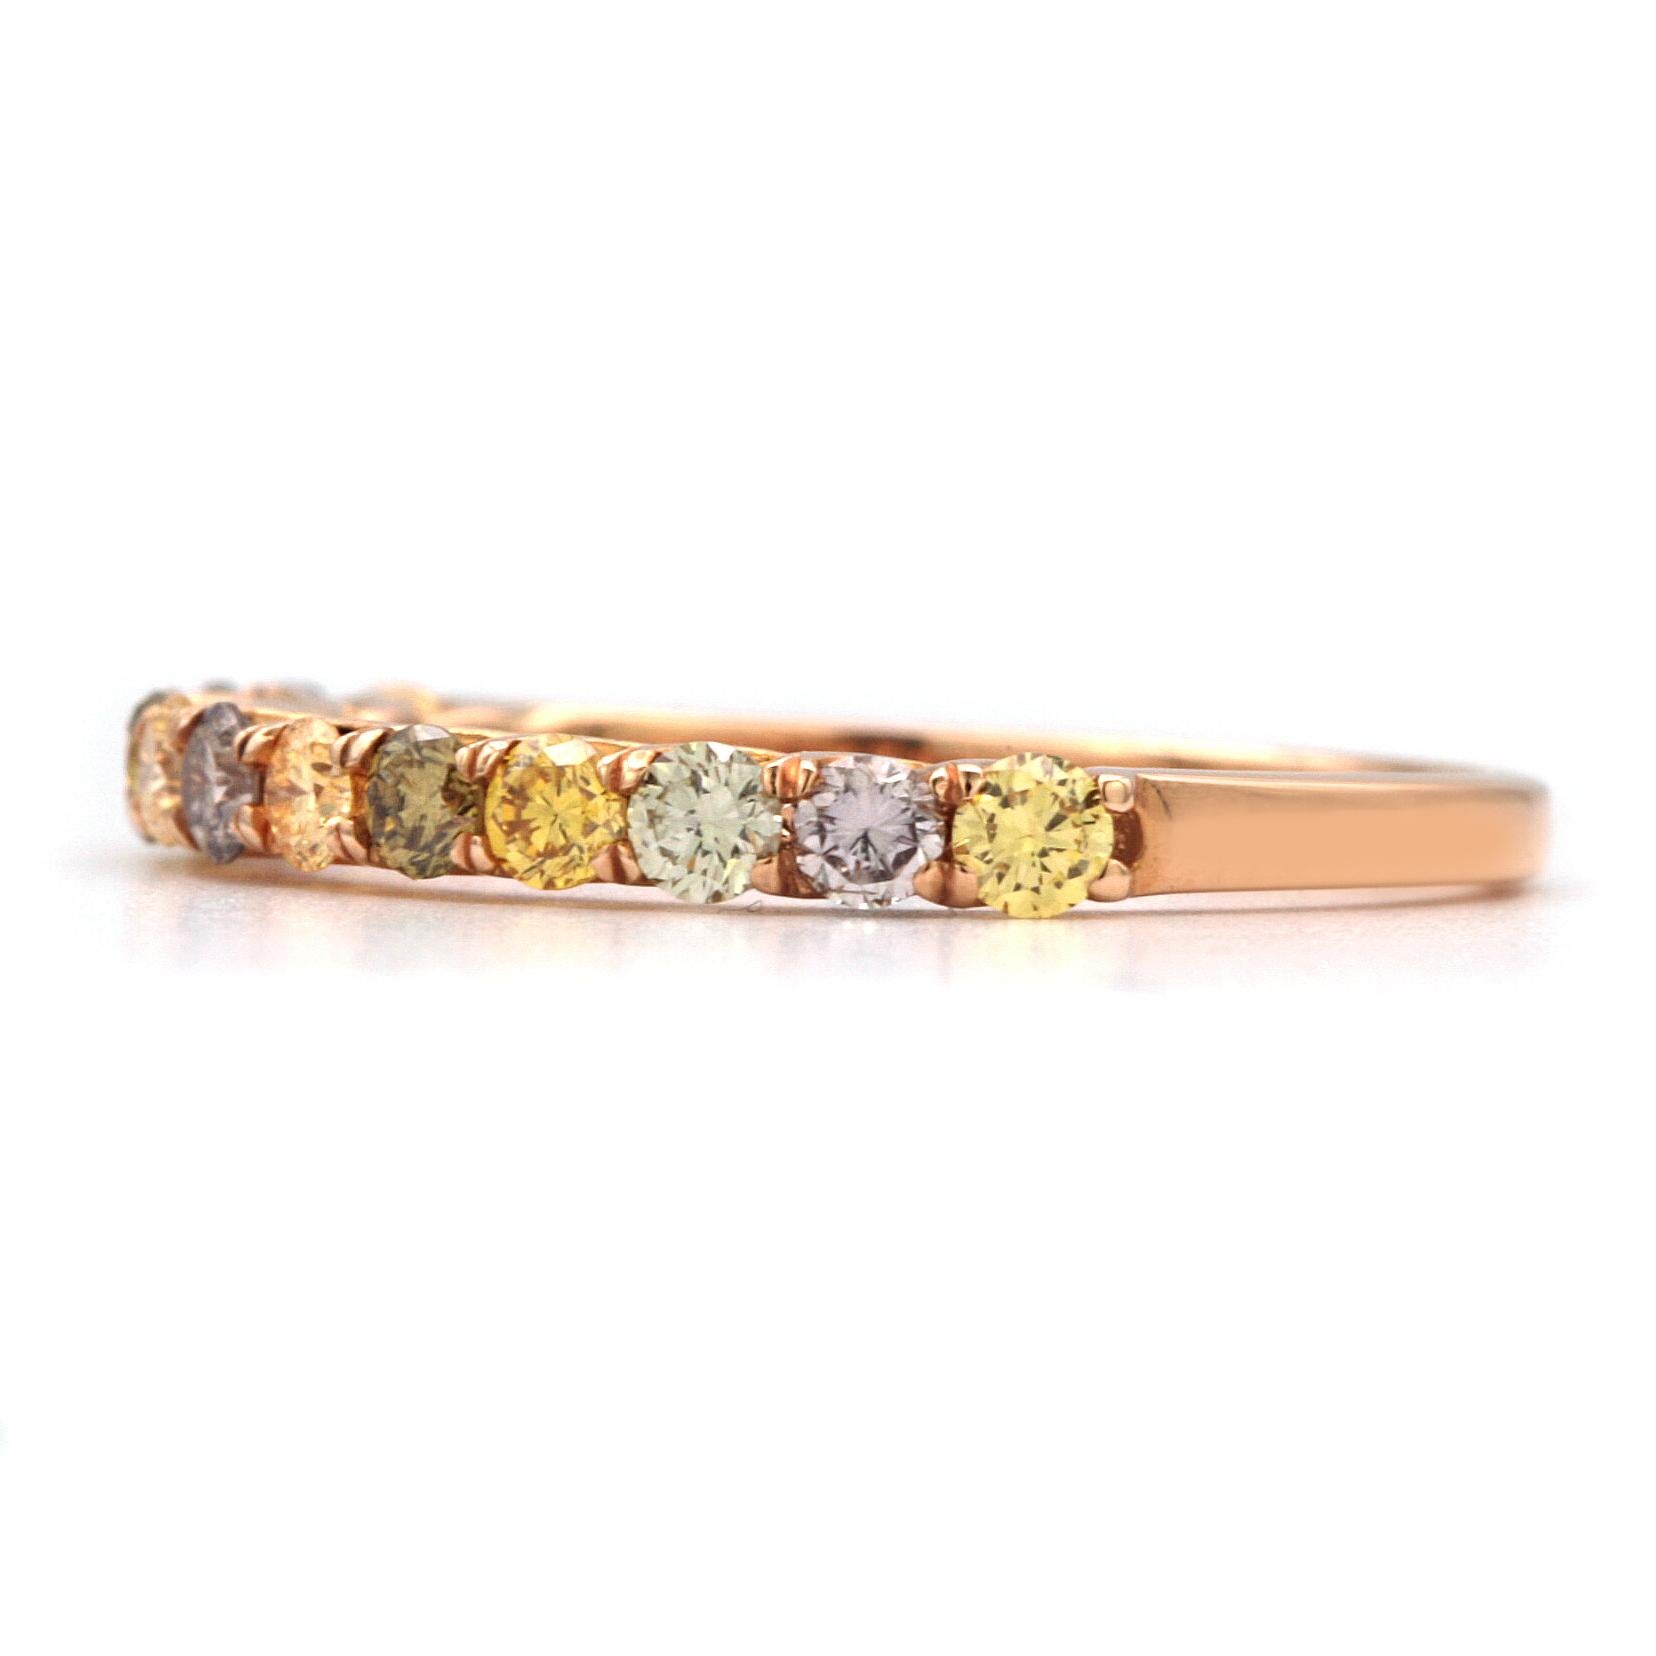 This beautiful and modern ring has 13 Natural Multicolored Diamonds giving it a total carat weight of 0.59ct. Four are Intense Yellow, 3 are Fancy Purplish Pink, 2 are Fancy Yellowish Green, and 4 are White.
Clarity is approx. I1.
Stamped 